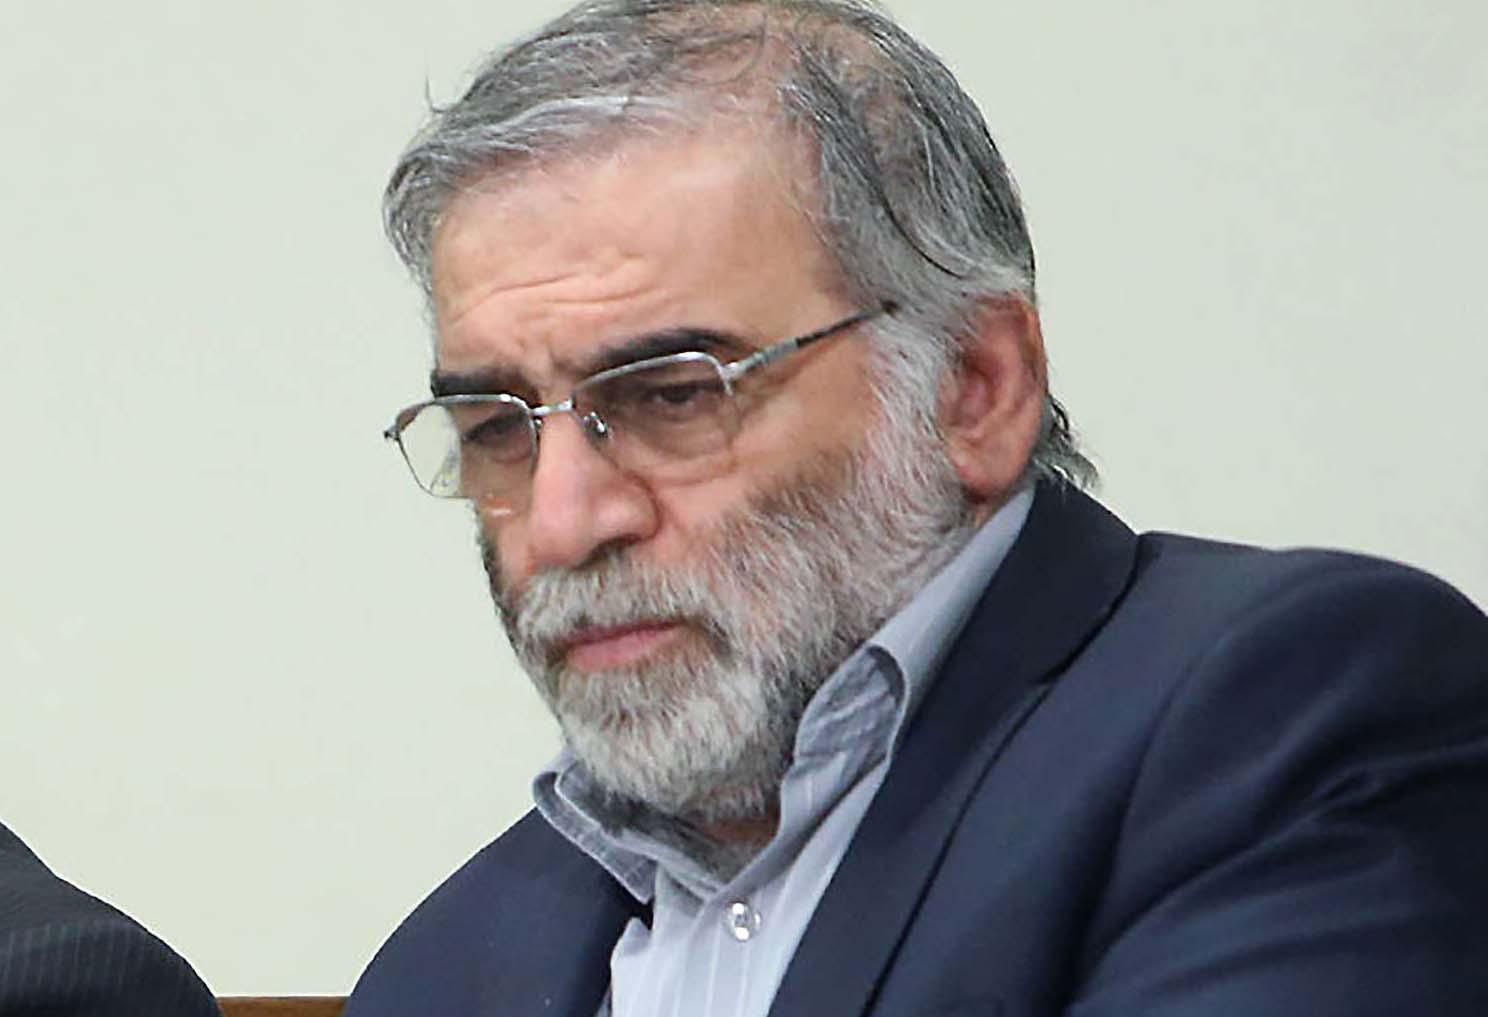 Iran pointed the finger at Israel for Mohsen Fakhrizadeh's assassination